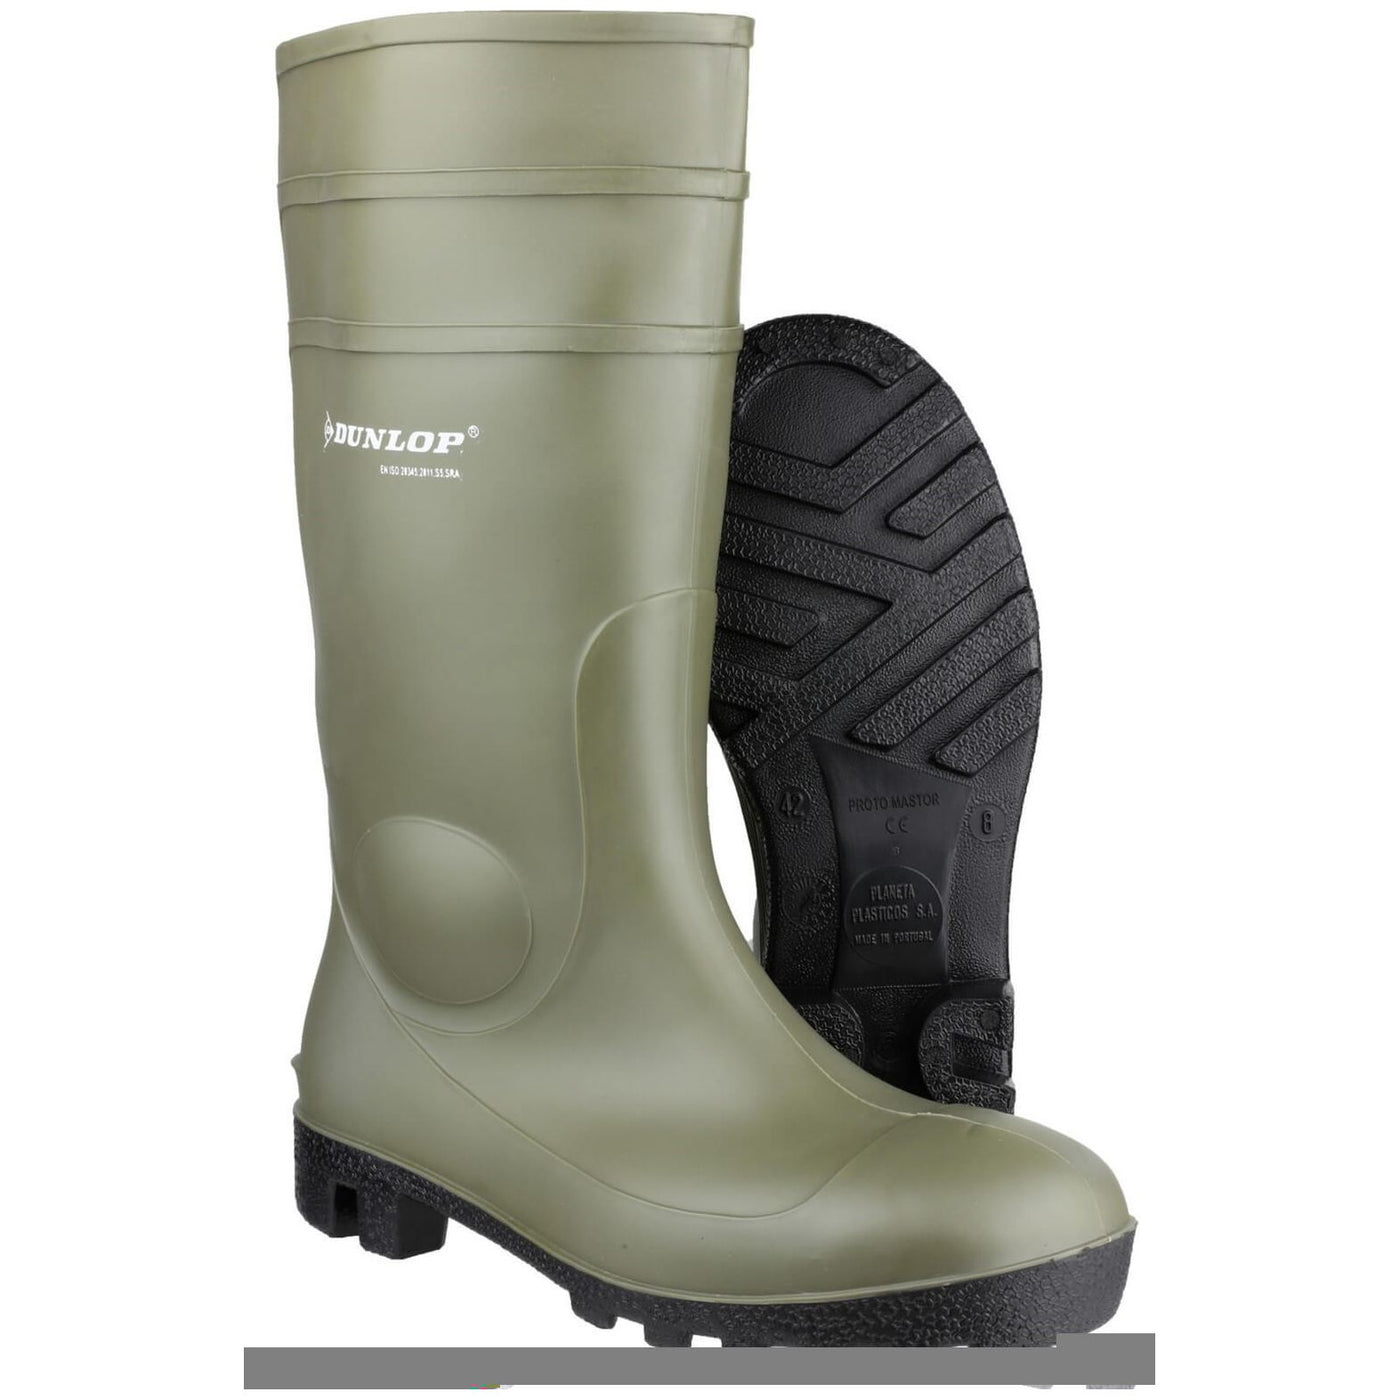 Dunlop Protomastor S5 Safety Wellies -Green-3